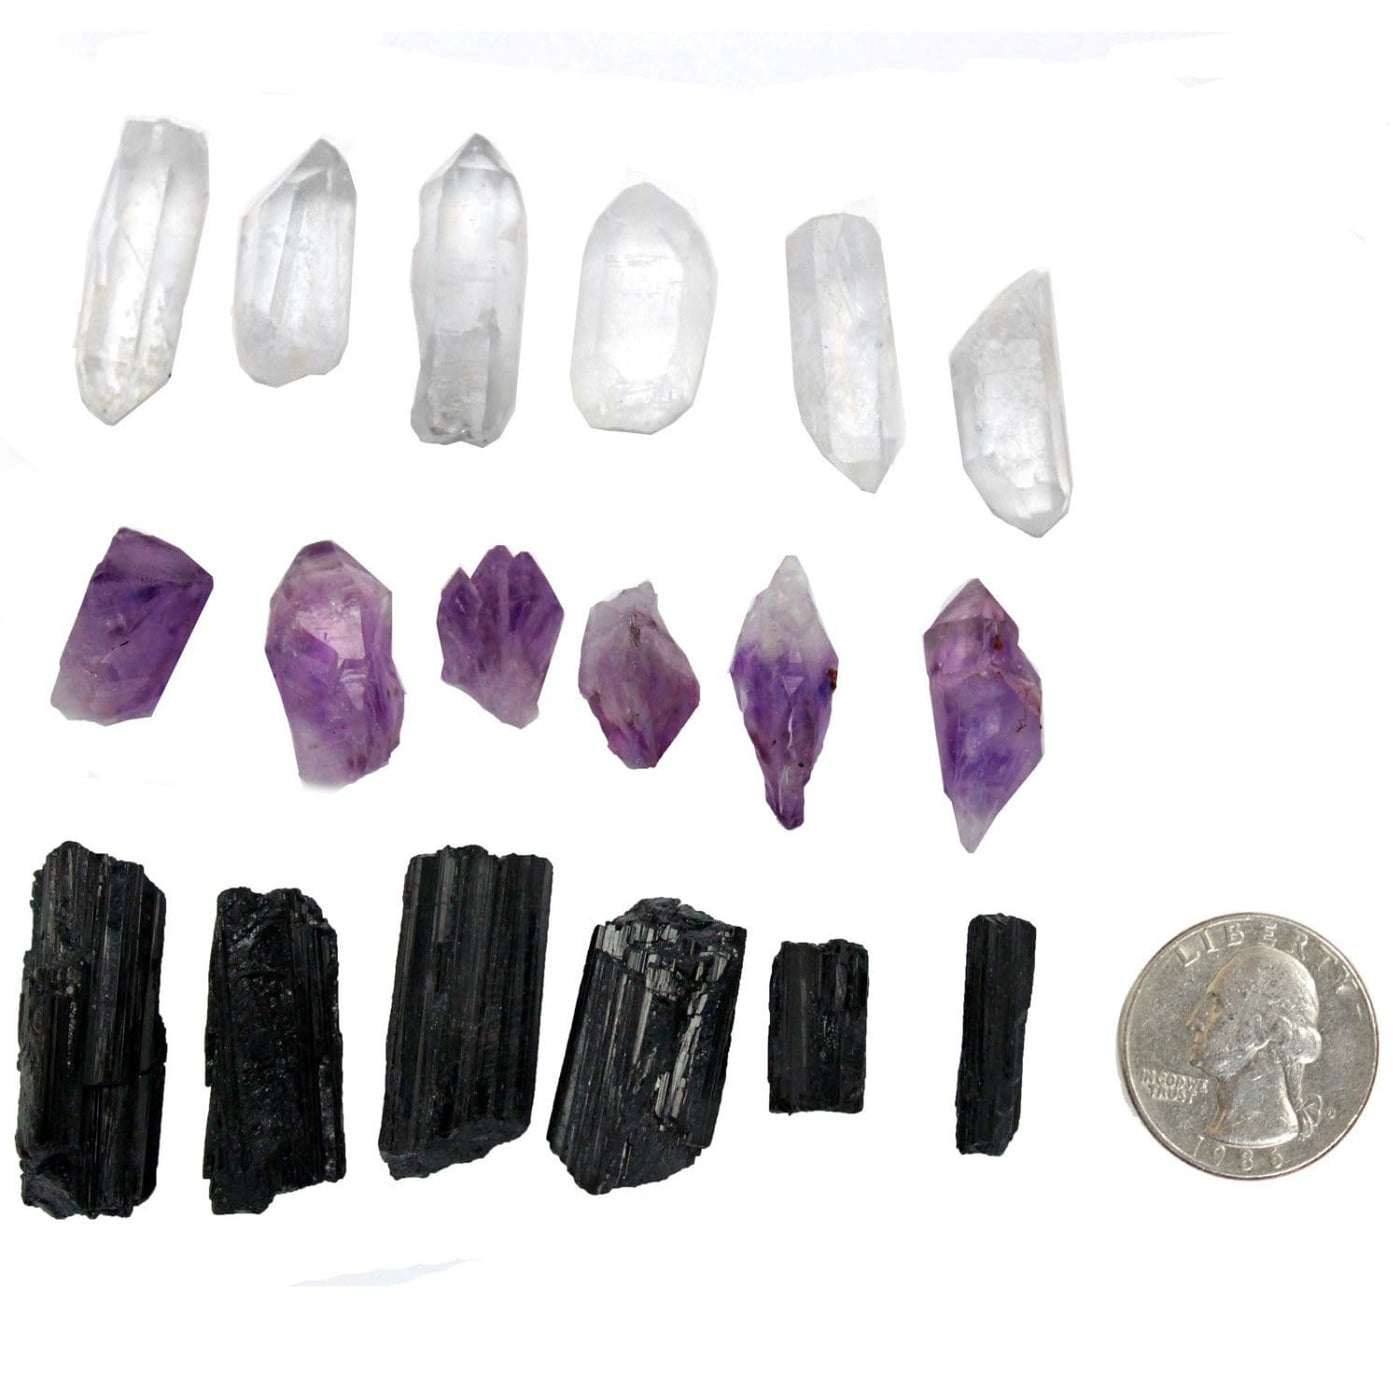 Tourmaline, Crystal Quartz, and Amethyst stones next to a quarter for sizing 